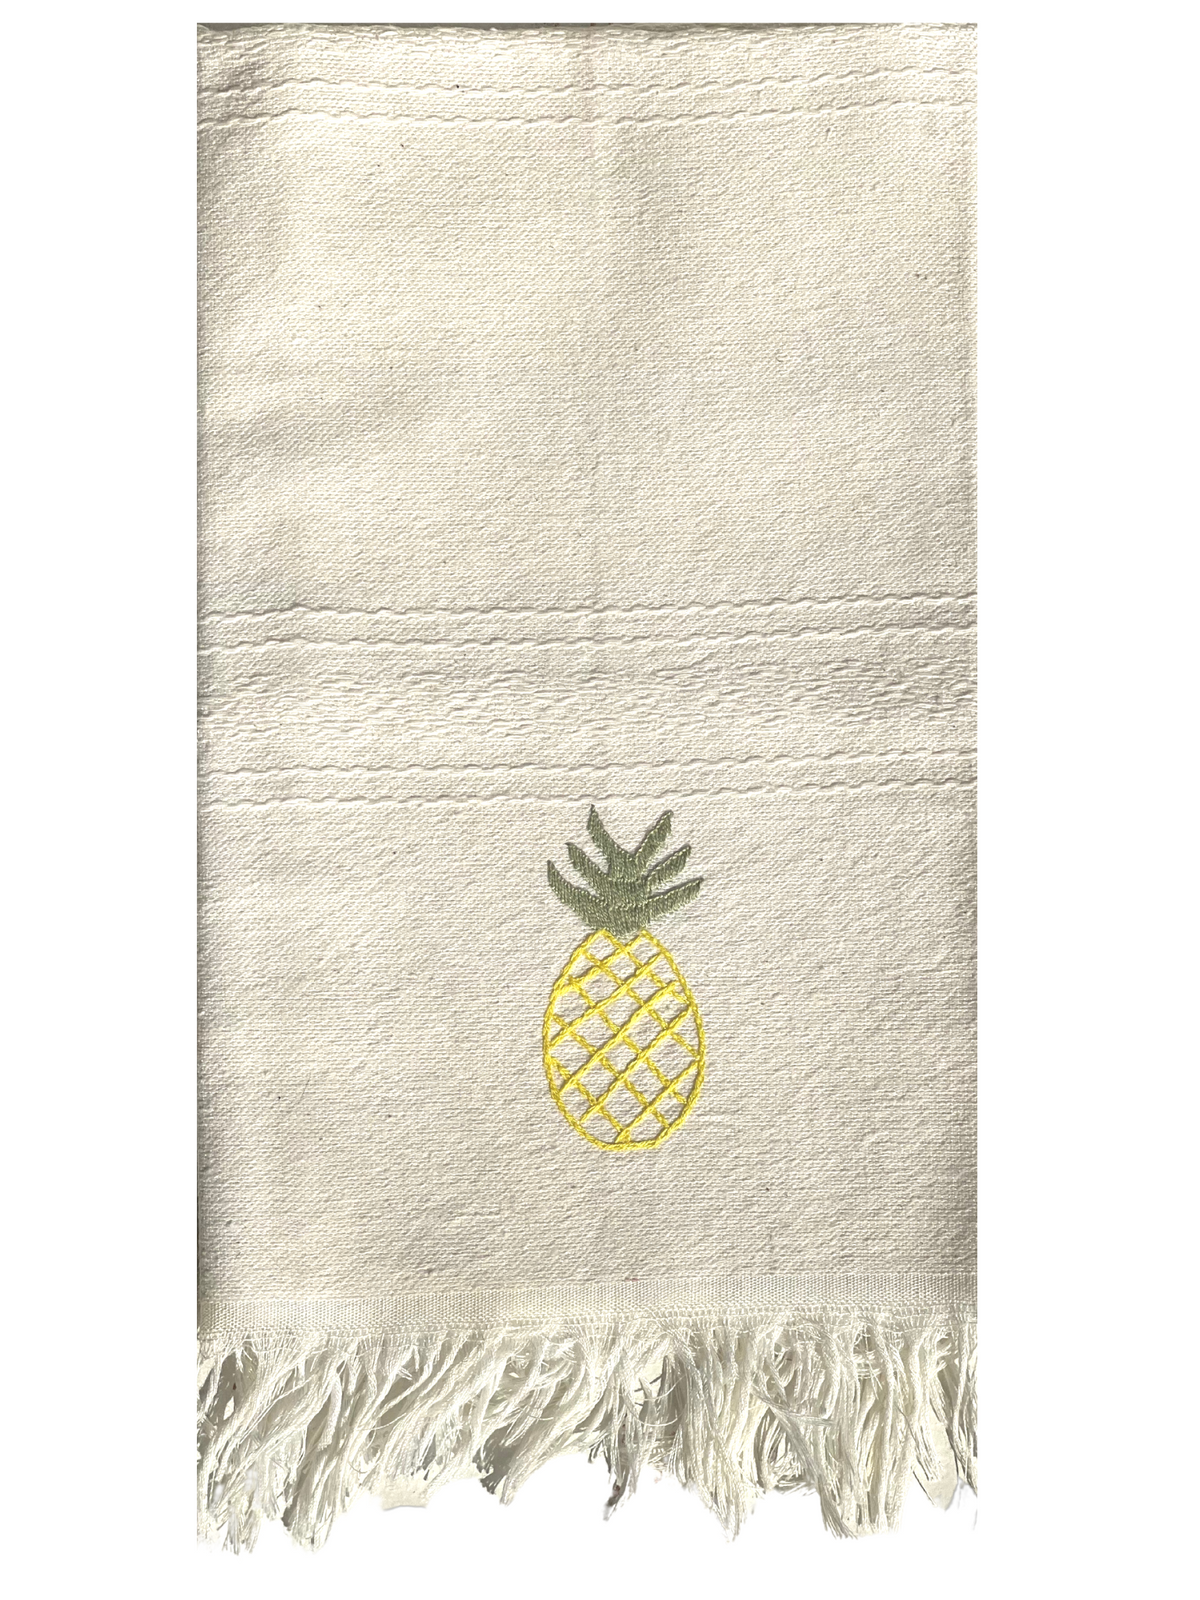 Hand Towel with Hand Stitched Pineapple - Charleston Collection